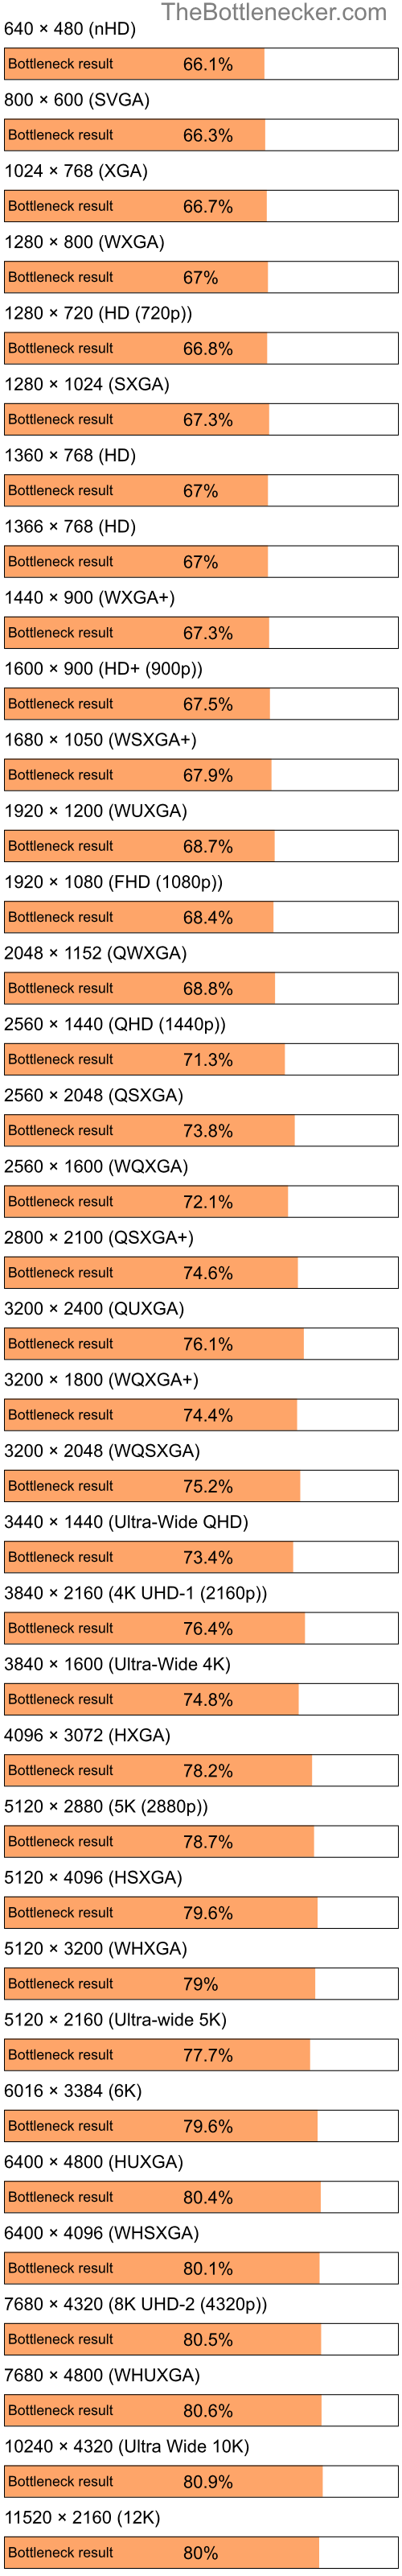 Bottleneck results by resolution for Intel Pentium 4 and AMD Radeon 9700 PRO in Processor Intense Tasks